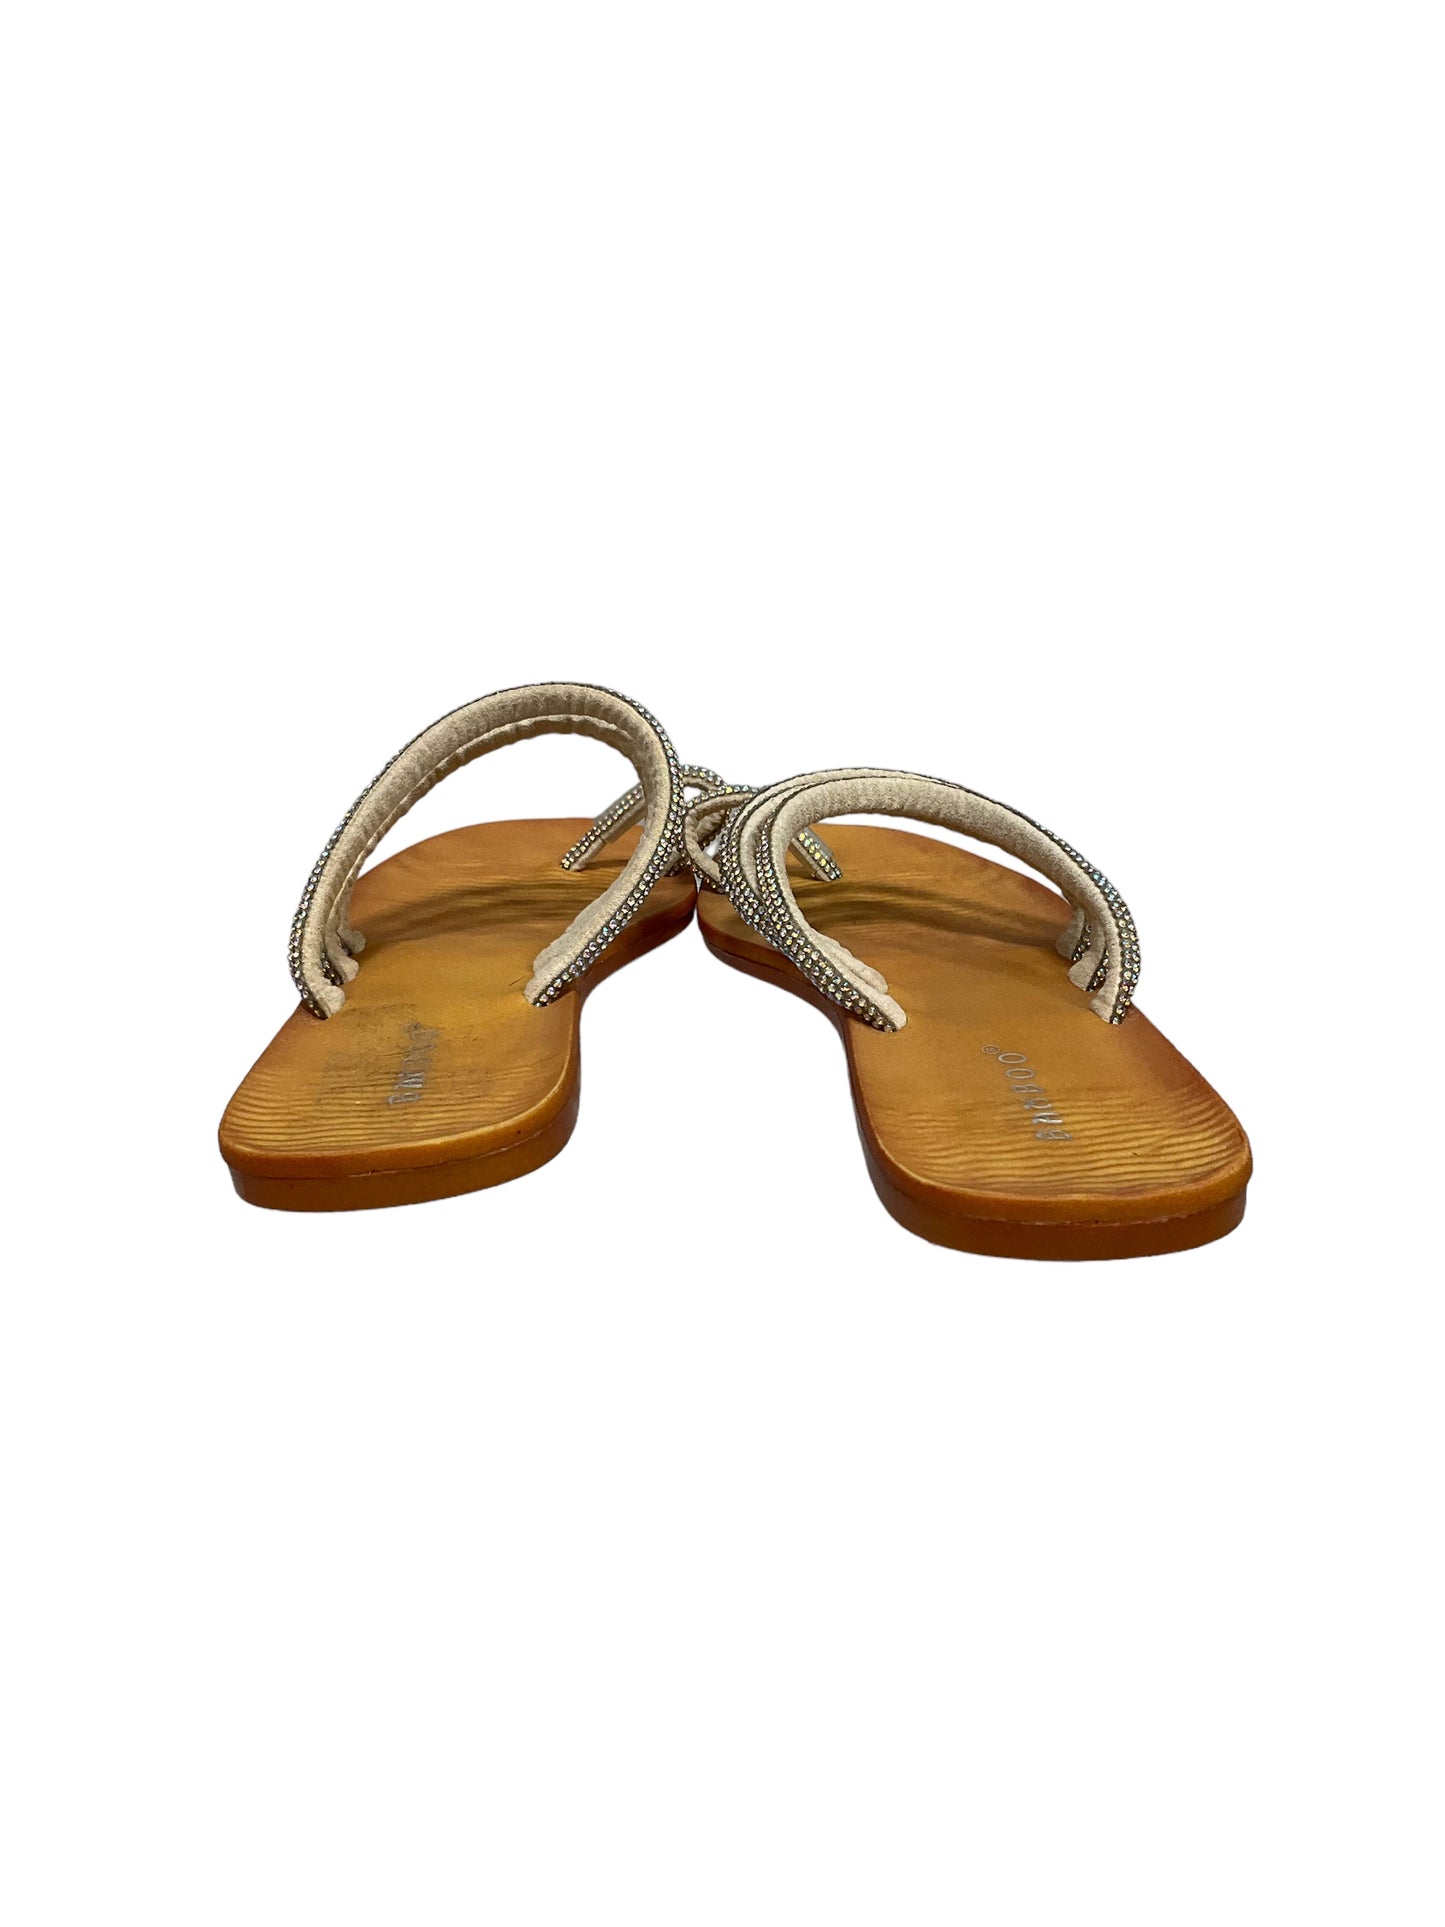 Sandals Flats By Bamboo  Size: 8